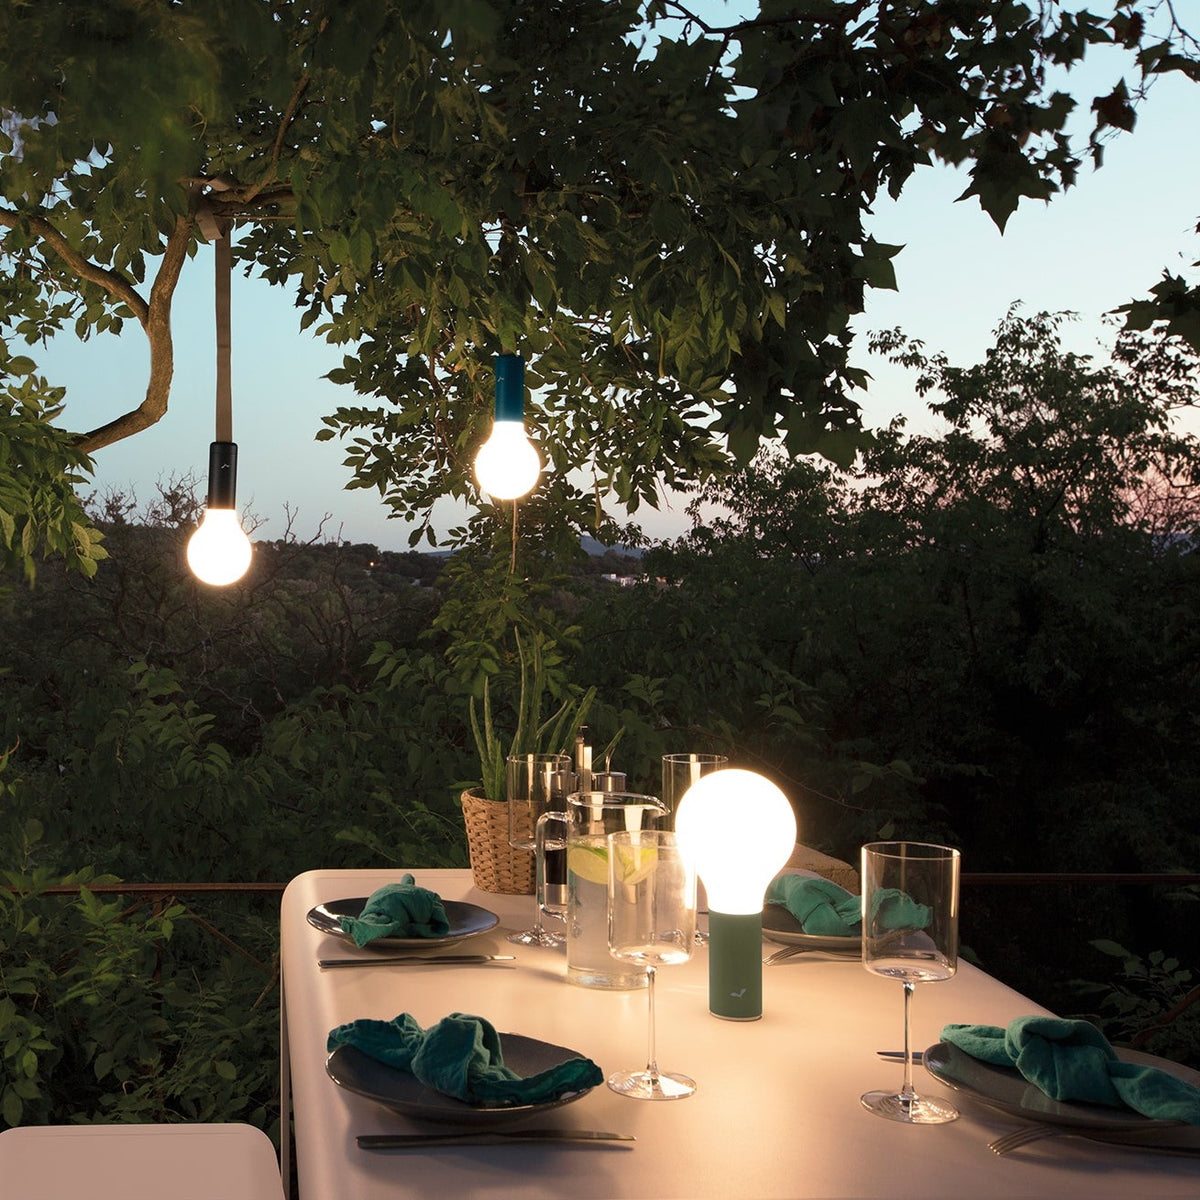 Fermob Aplo lamps on a table and also hanging from a tree with the Aplo Suspension Strap